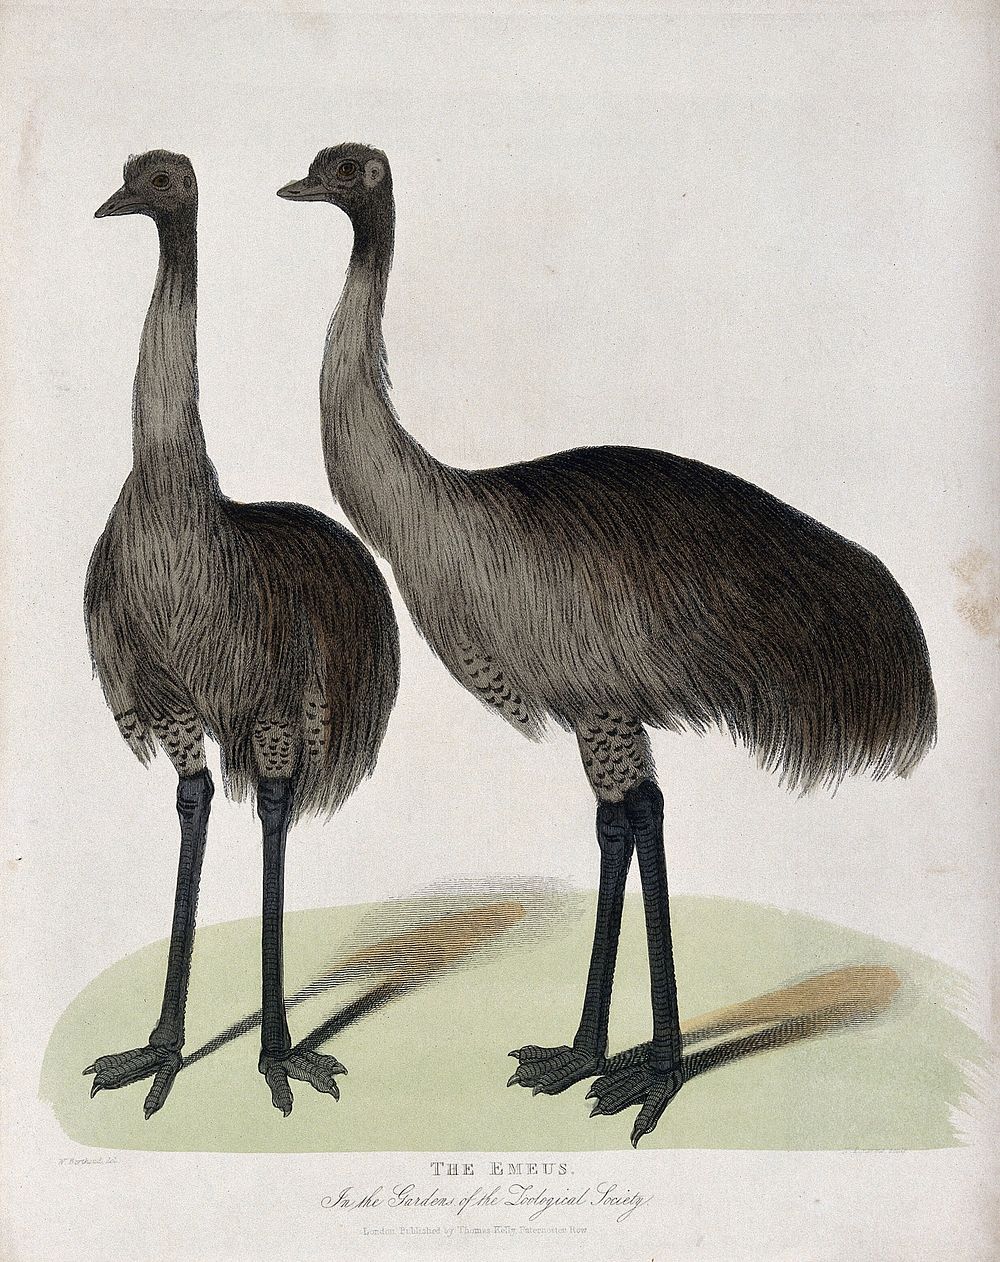 Zoological Society of London: two emus. Coloured etching by W. Panormo after W. Berthoud.